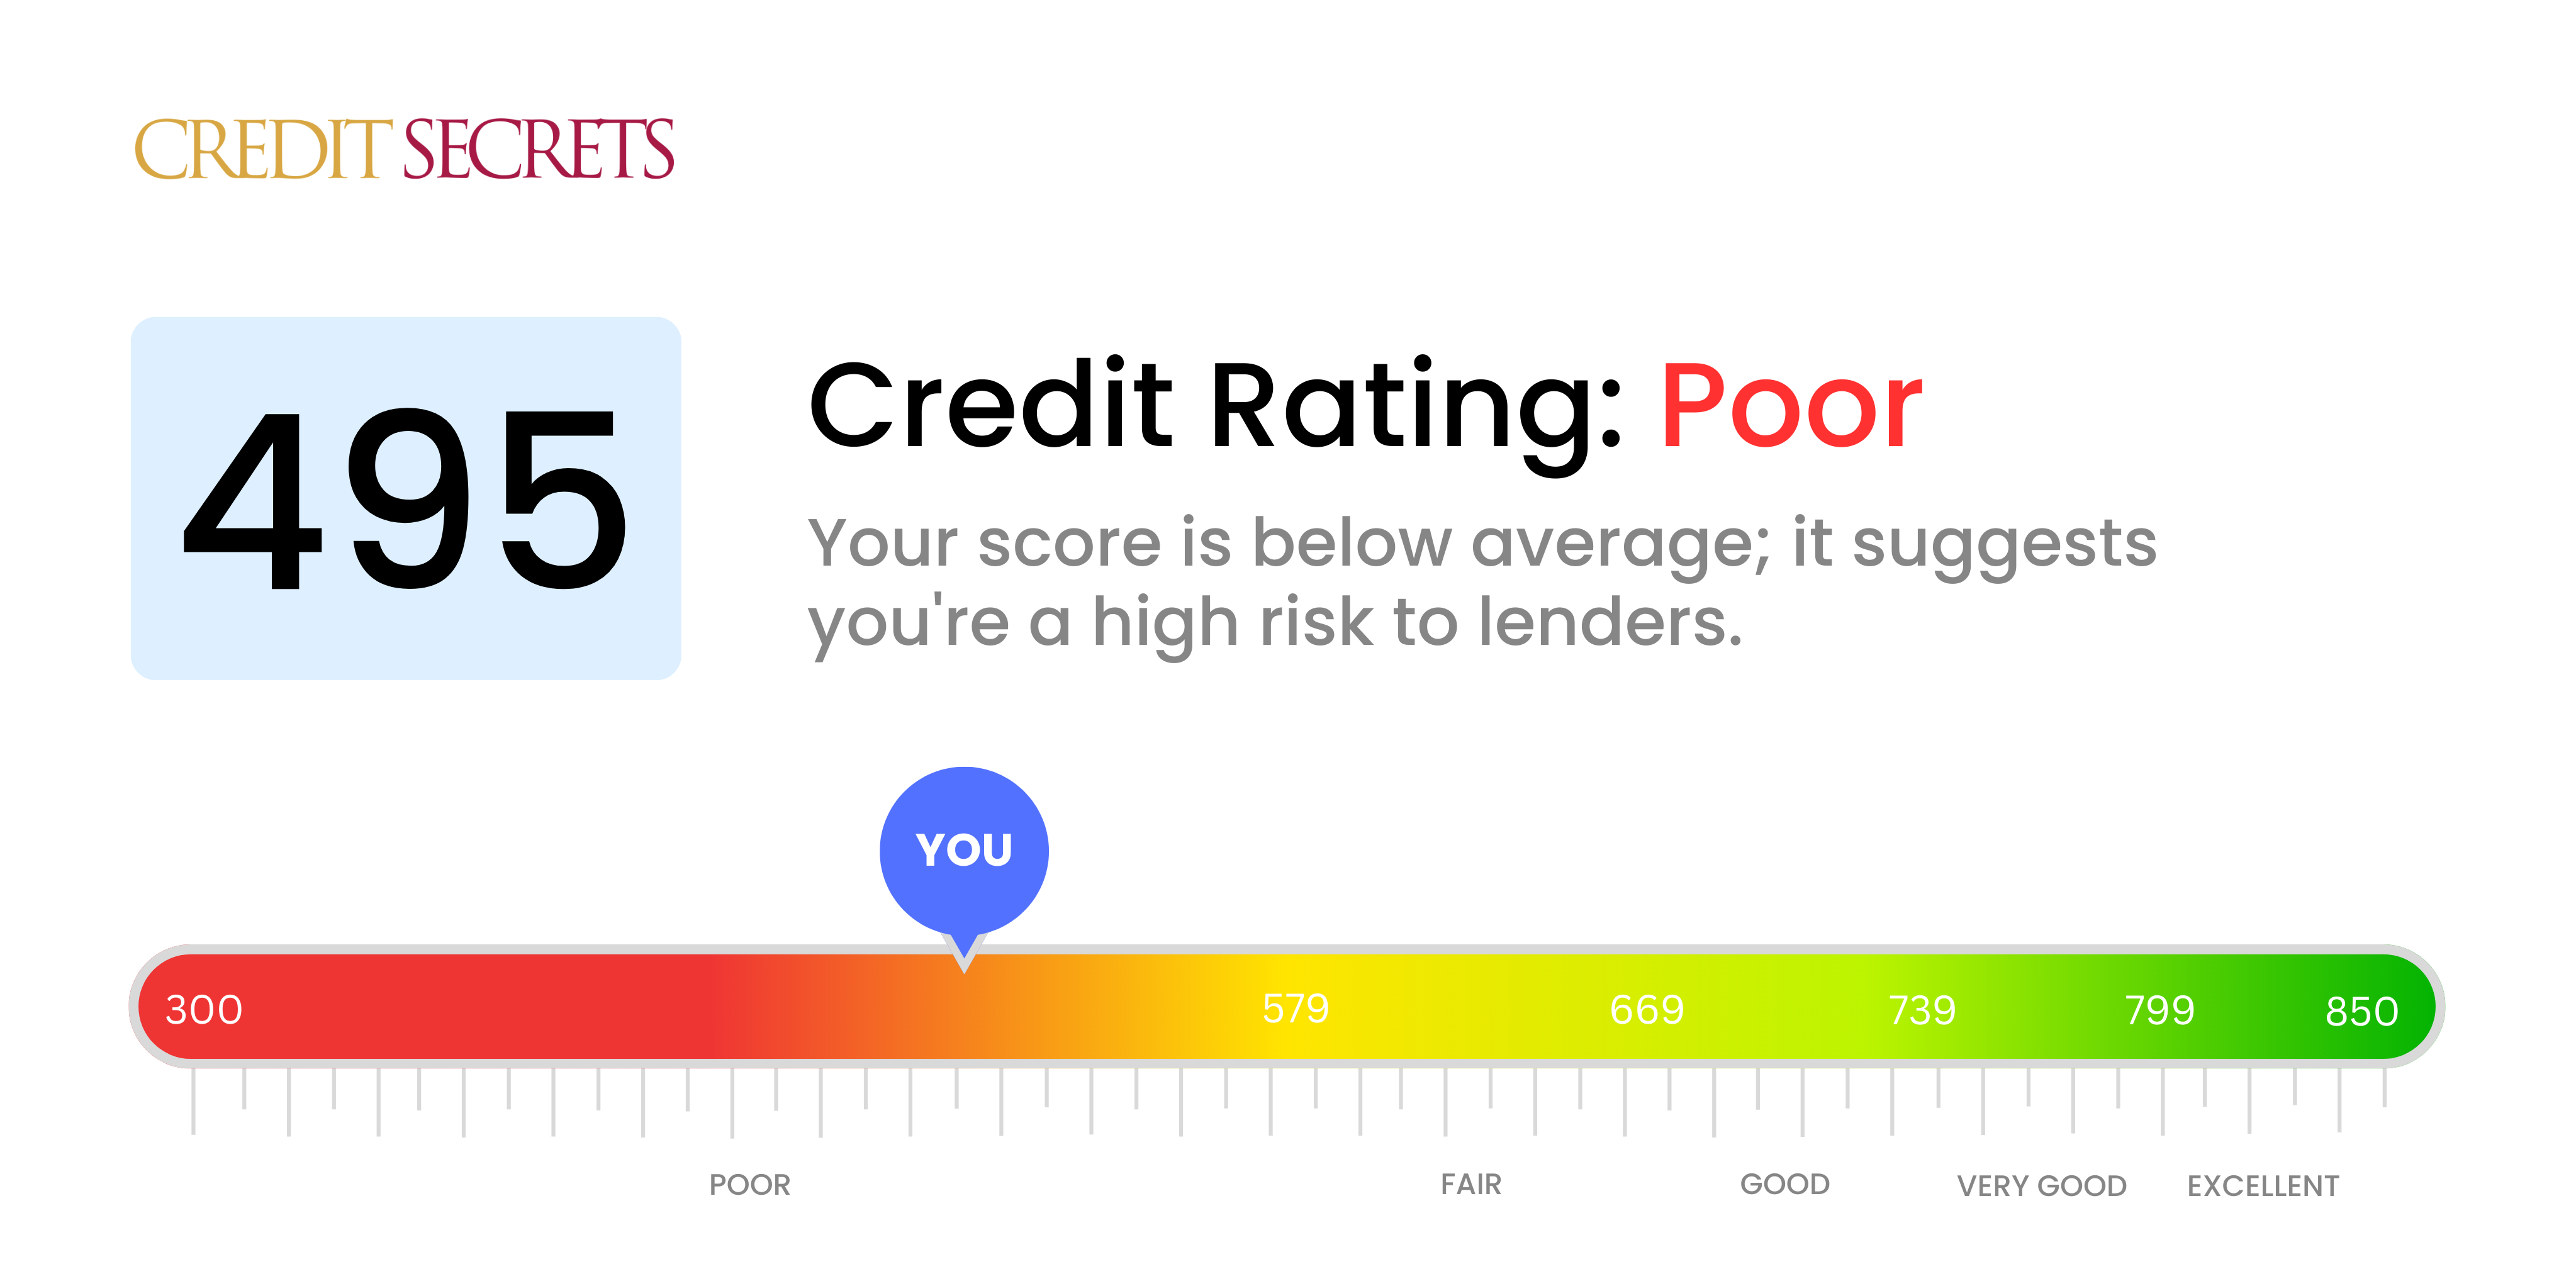 Is 495 a good credit score?